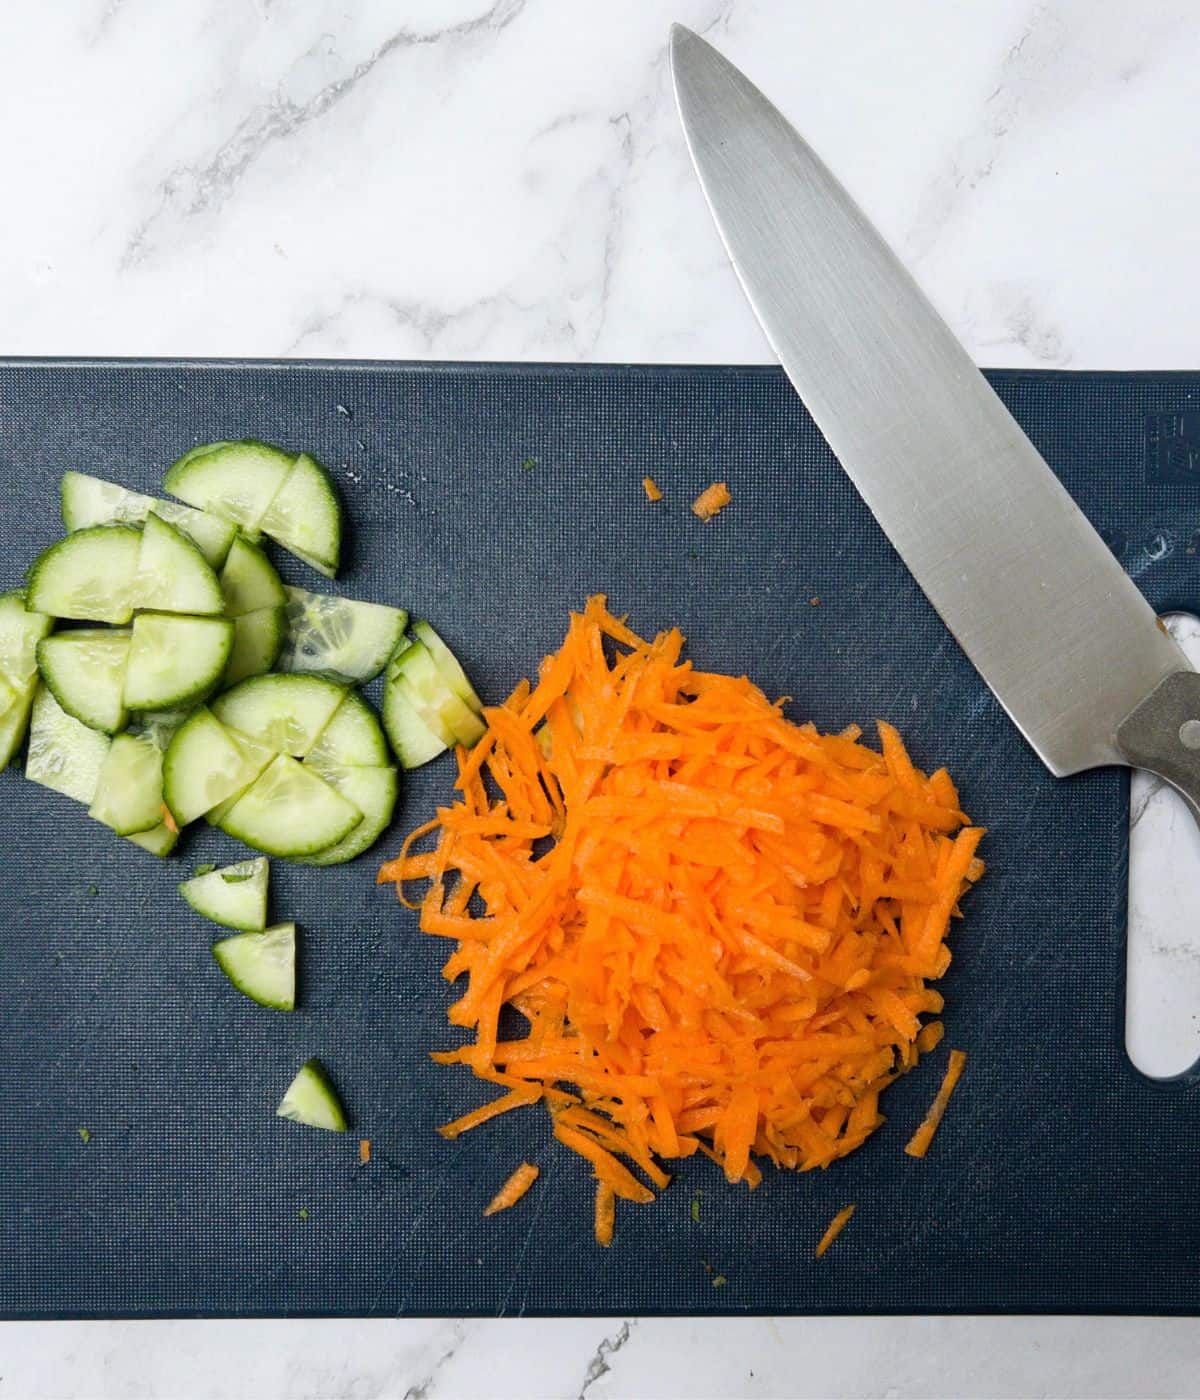 Chopped cucumber and grated carrot on a chopping board with a knife.